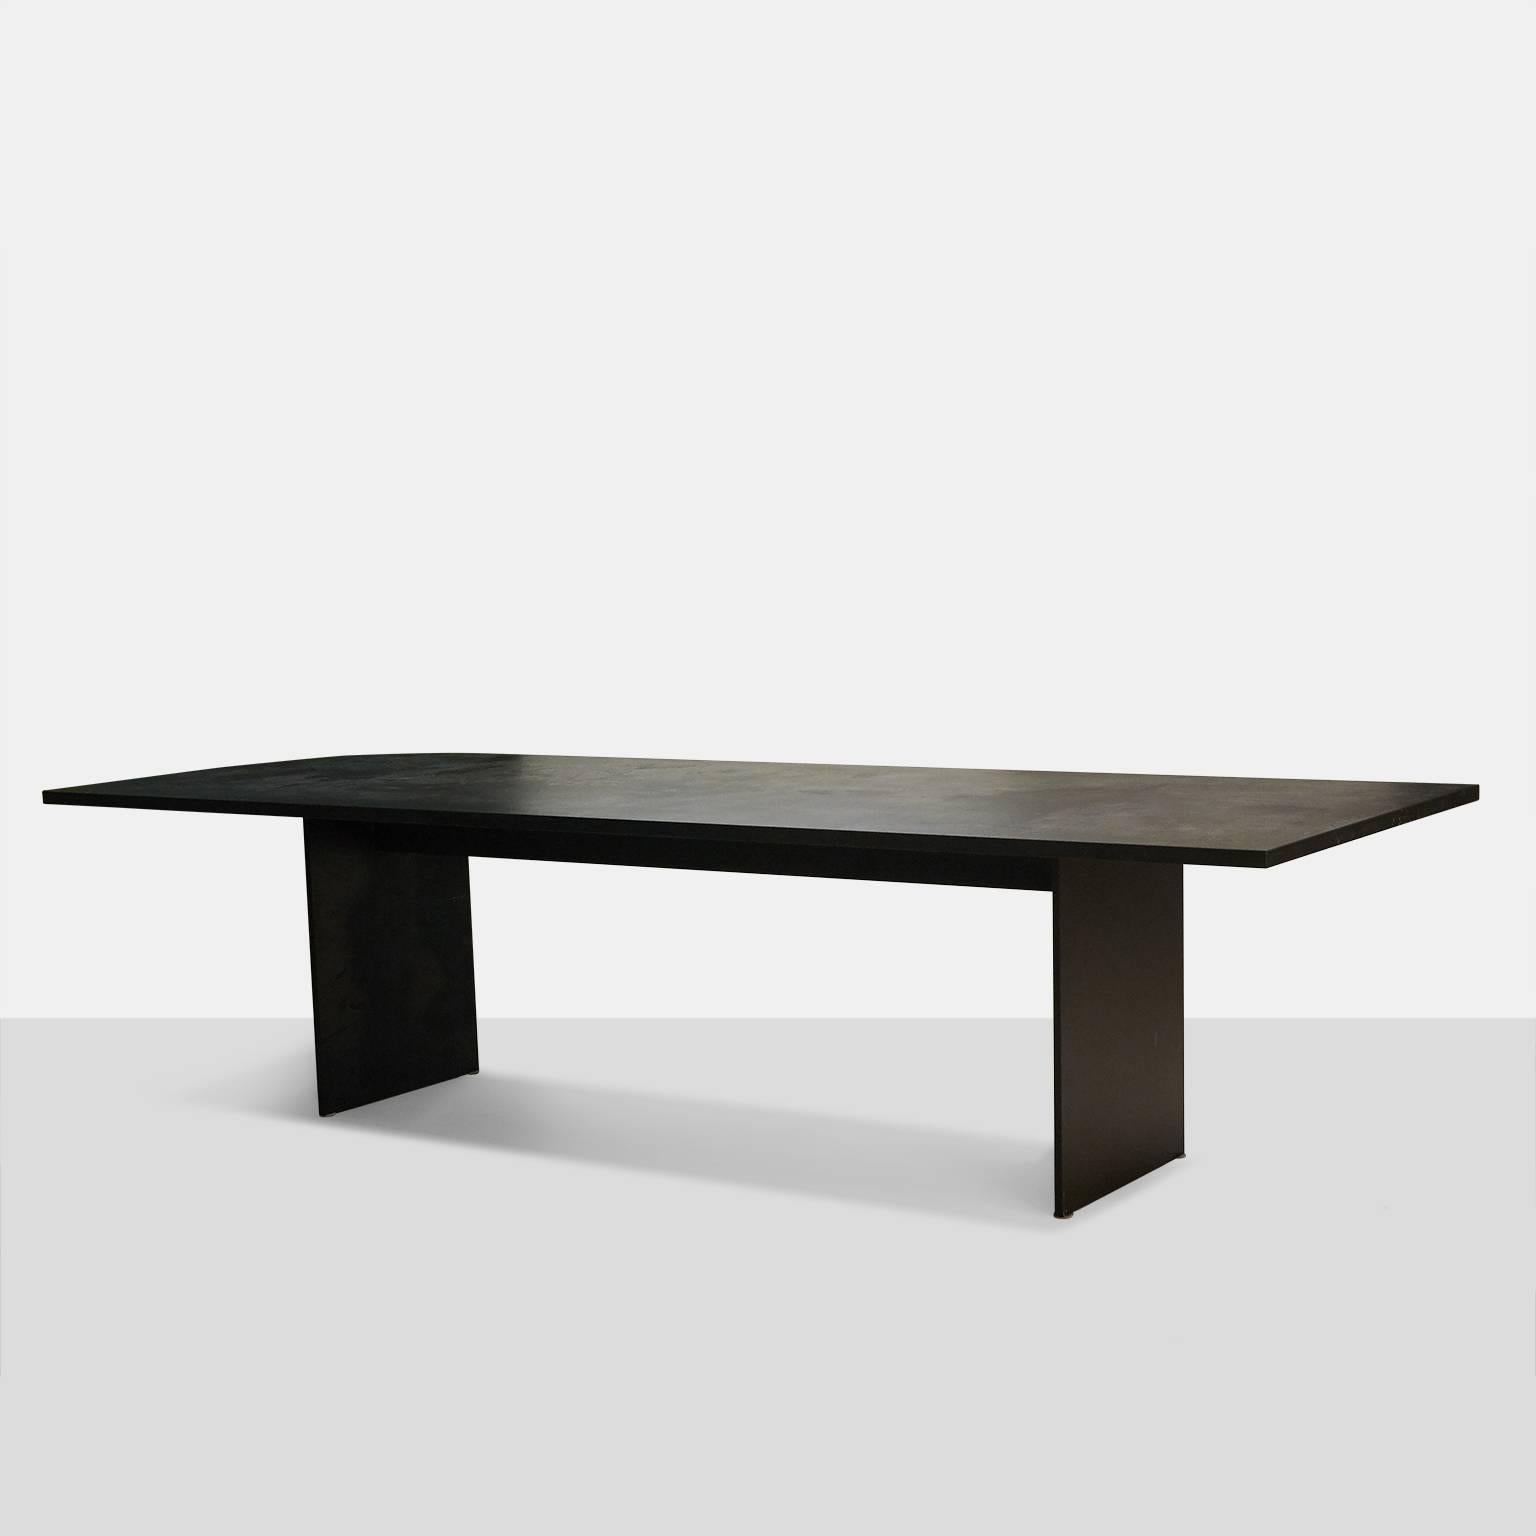 A very large-scale one of a kind dining table created in San Francisco as part of a new collection for Almond & Company. The tabletop is one piece of absolute black granite with a leathered finish over a powder coated solid steel base in black.